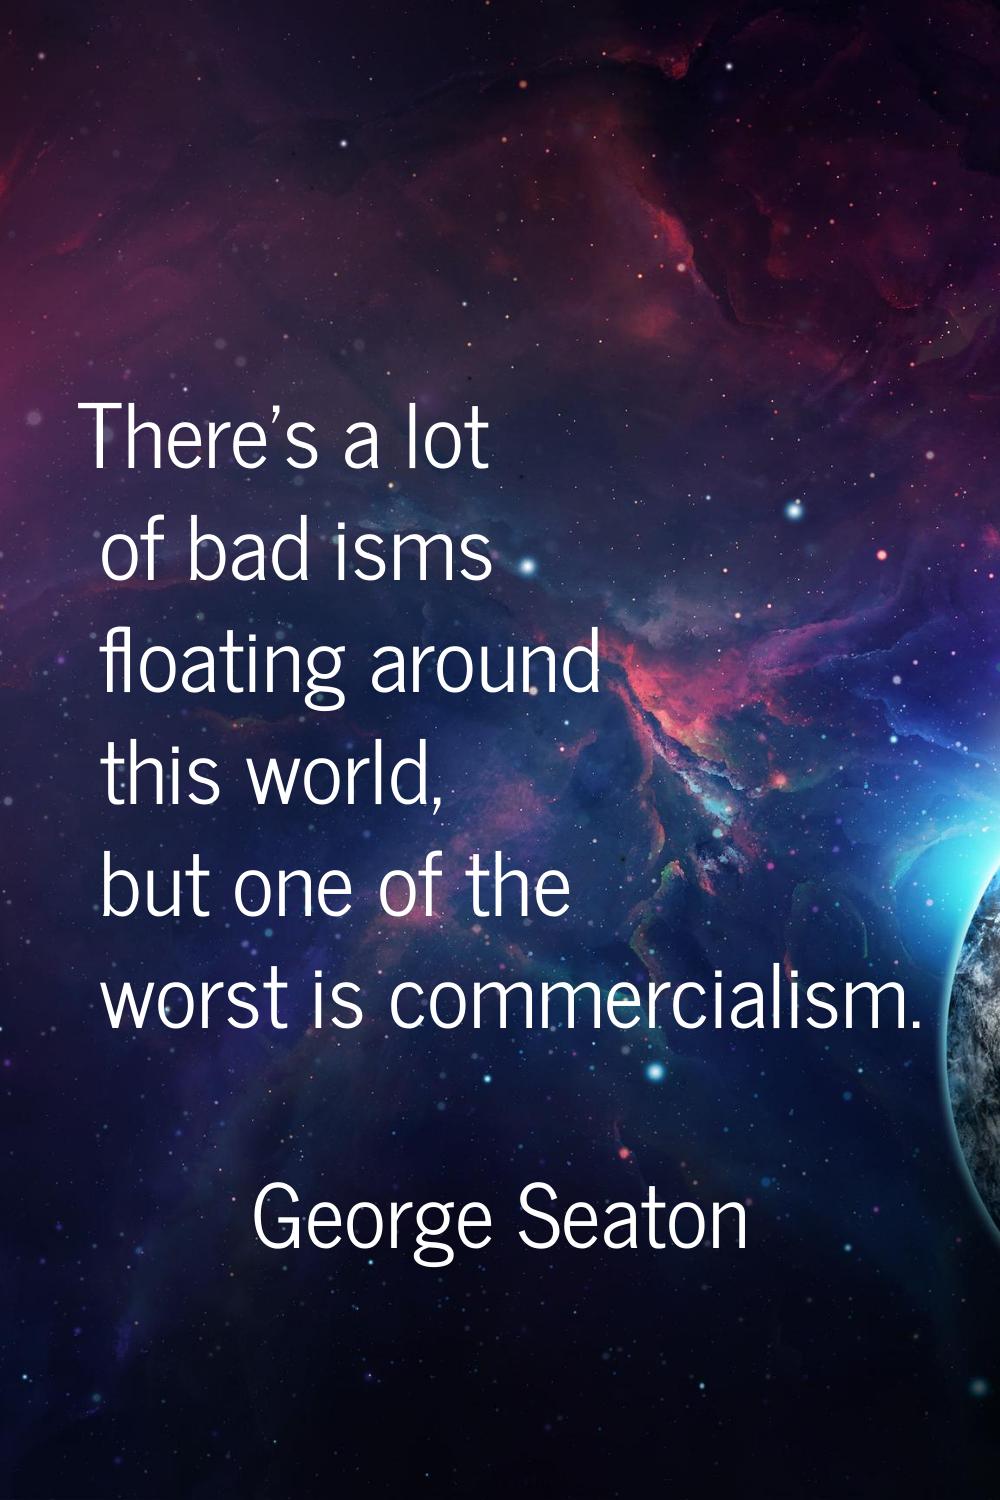 There's a lot of bad isms floating around this world, but one of the worst is commercialism.